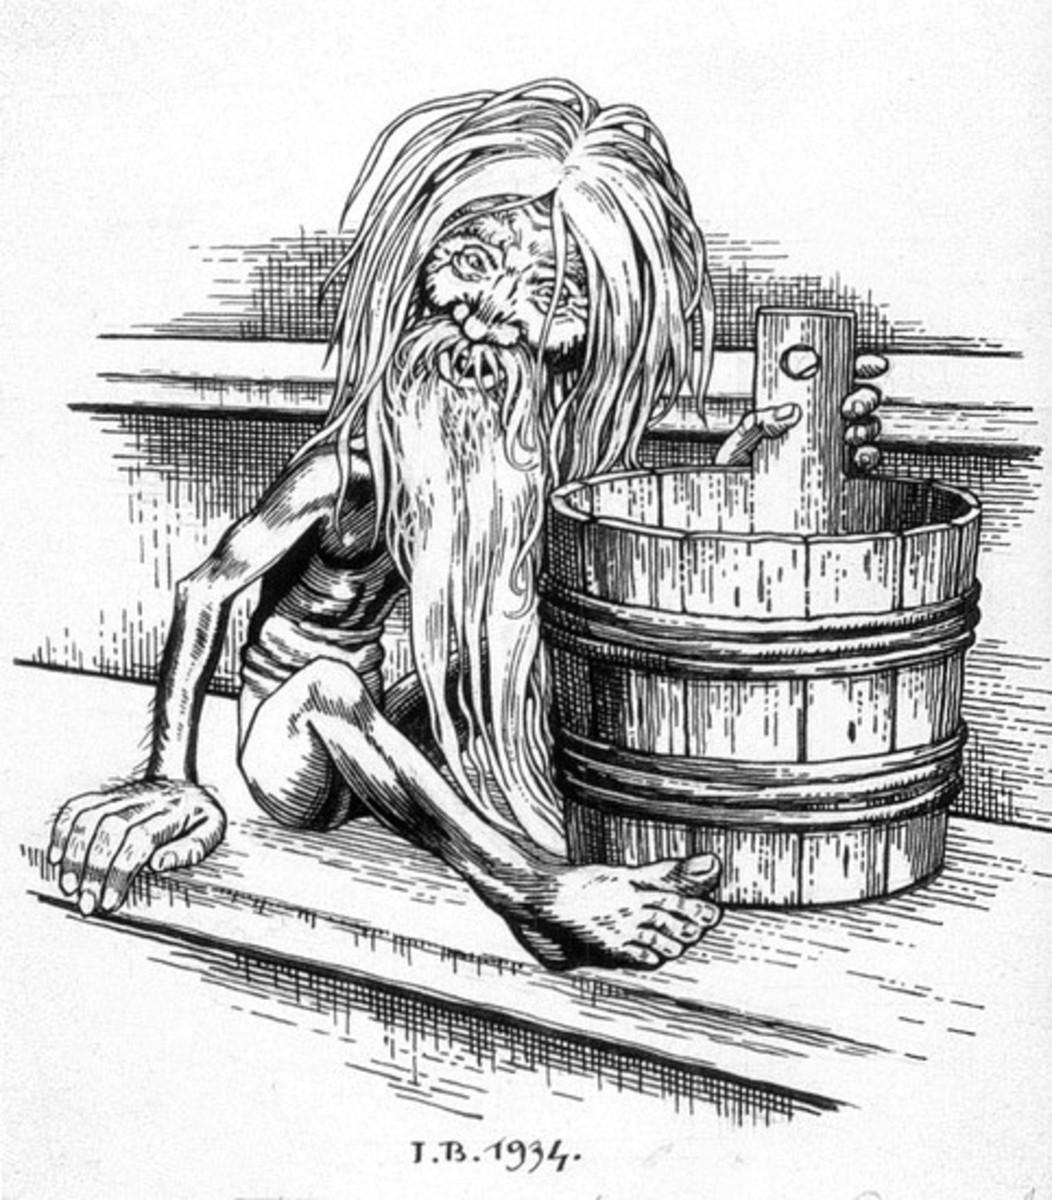 The Bannik is a quirky and unusual folklore character who haunts bathhouses. He upholds bathhouse etiquette and can become enraged by ill-behaved patrons.